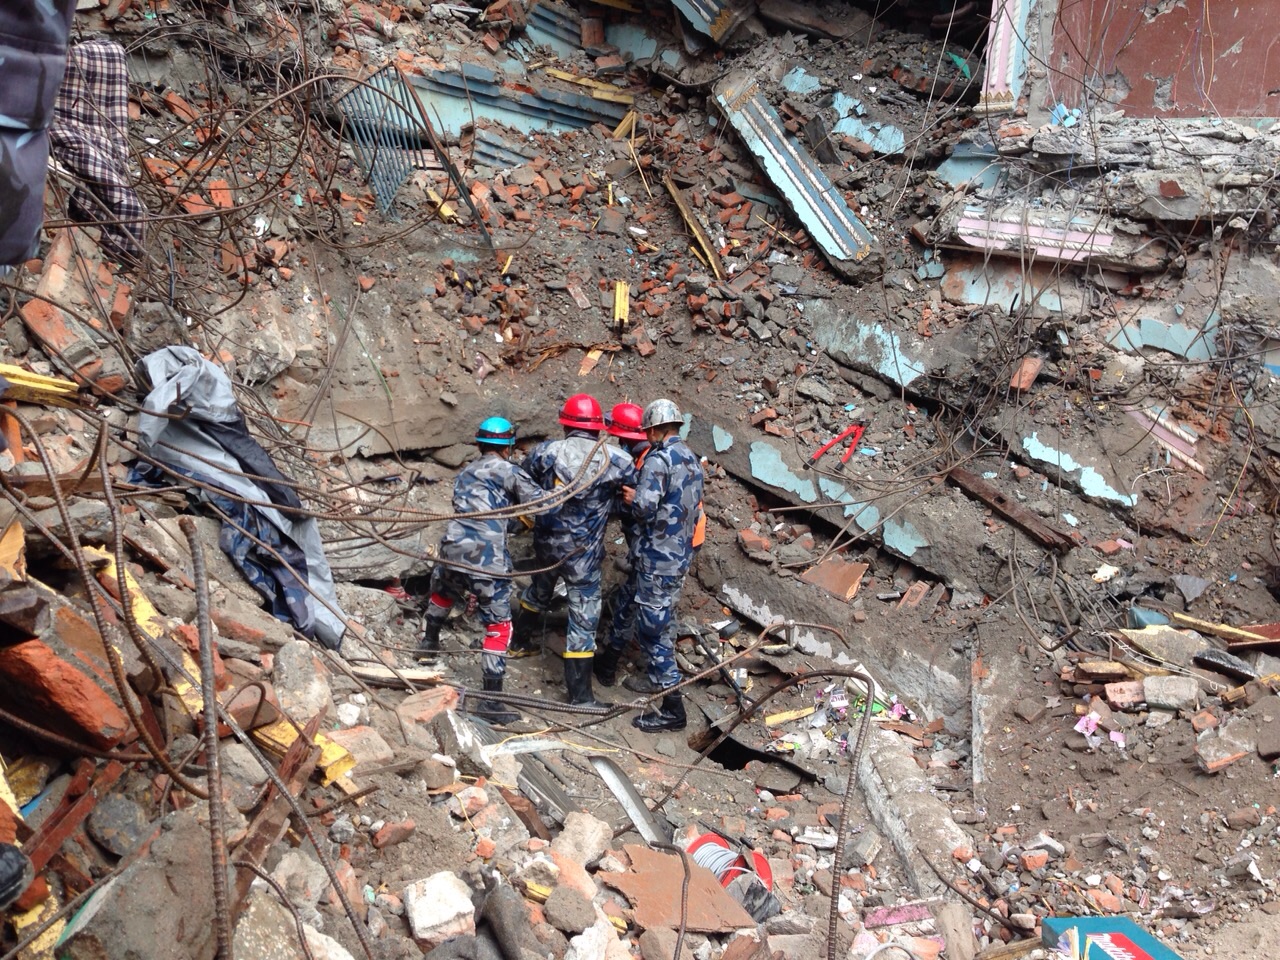 The first rescue team arriving at the scene where Pemba Tamang, 15, had been trapped for five days in Kathmandu, Nepal, April 30, 2015 (Adam McCauley for TIME)